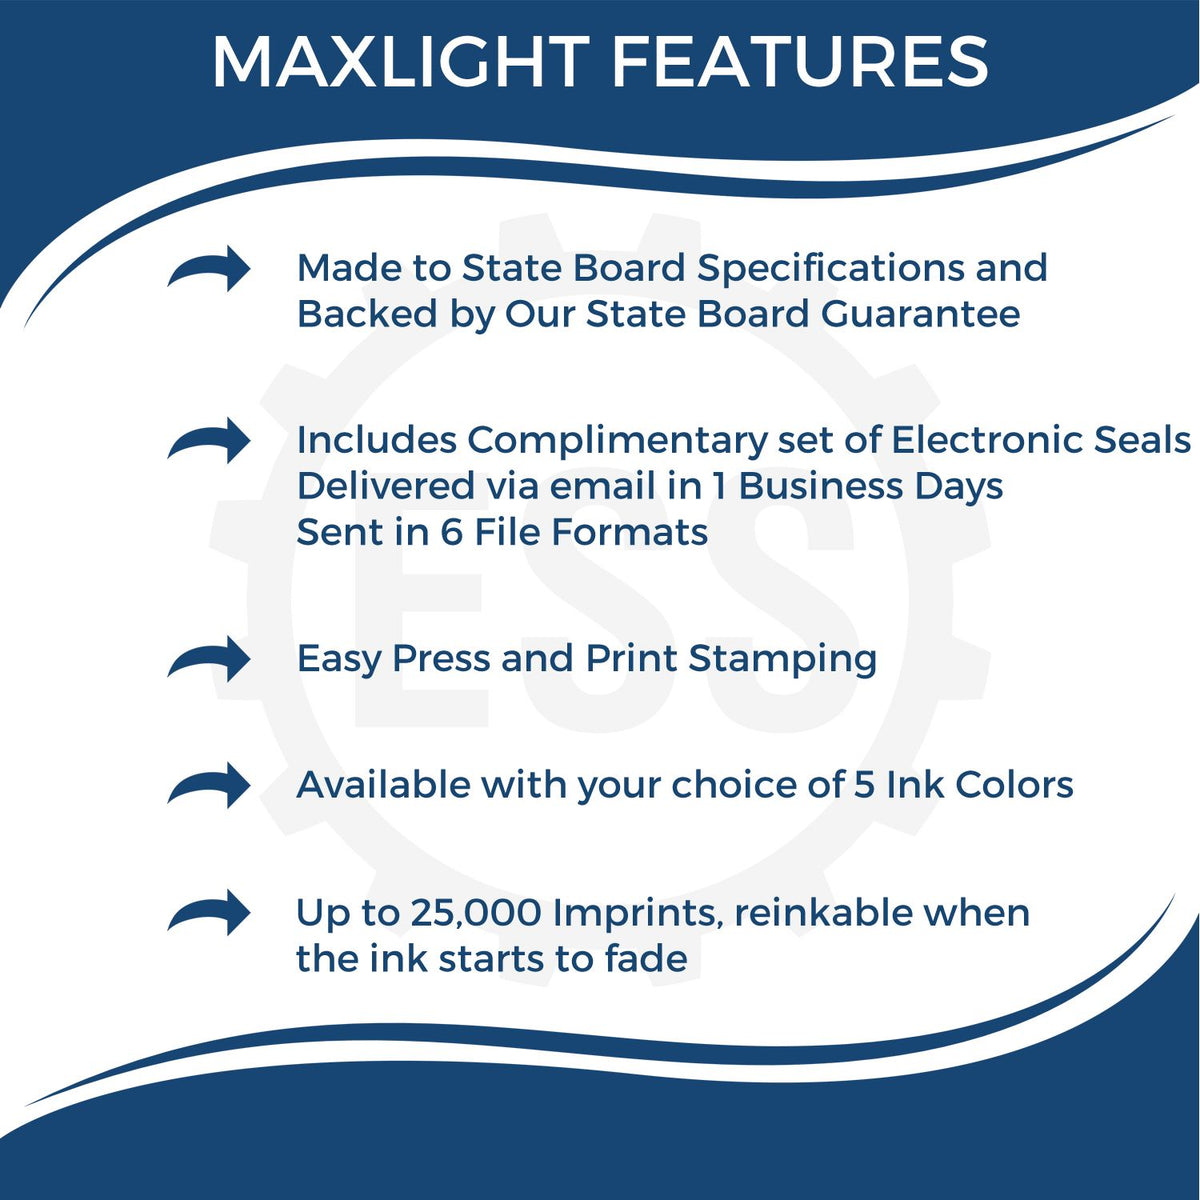 A picture of an infographic highlighting the selling points for the Premium MaxLight Pre-Inked Oklahoma Landscape Architectural Stamp